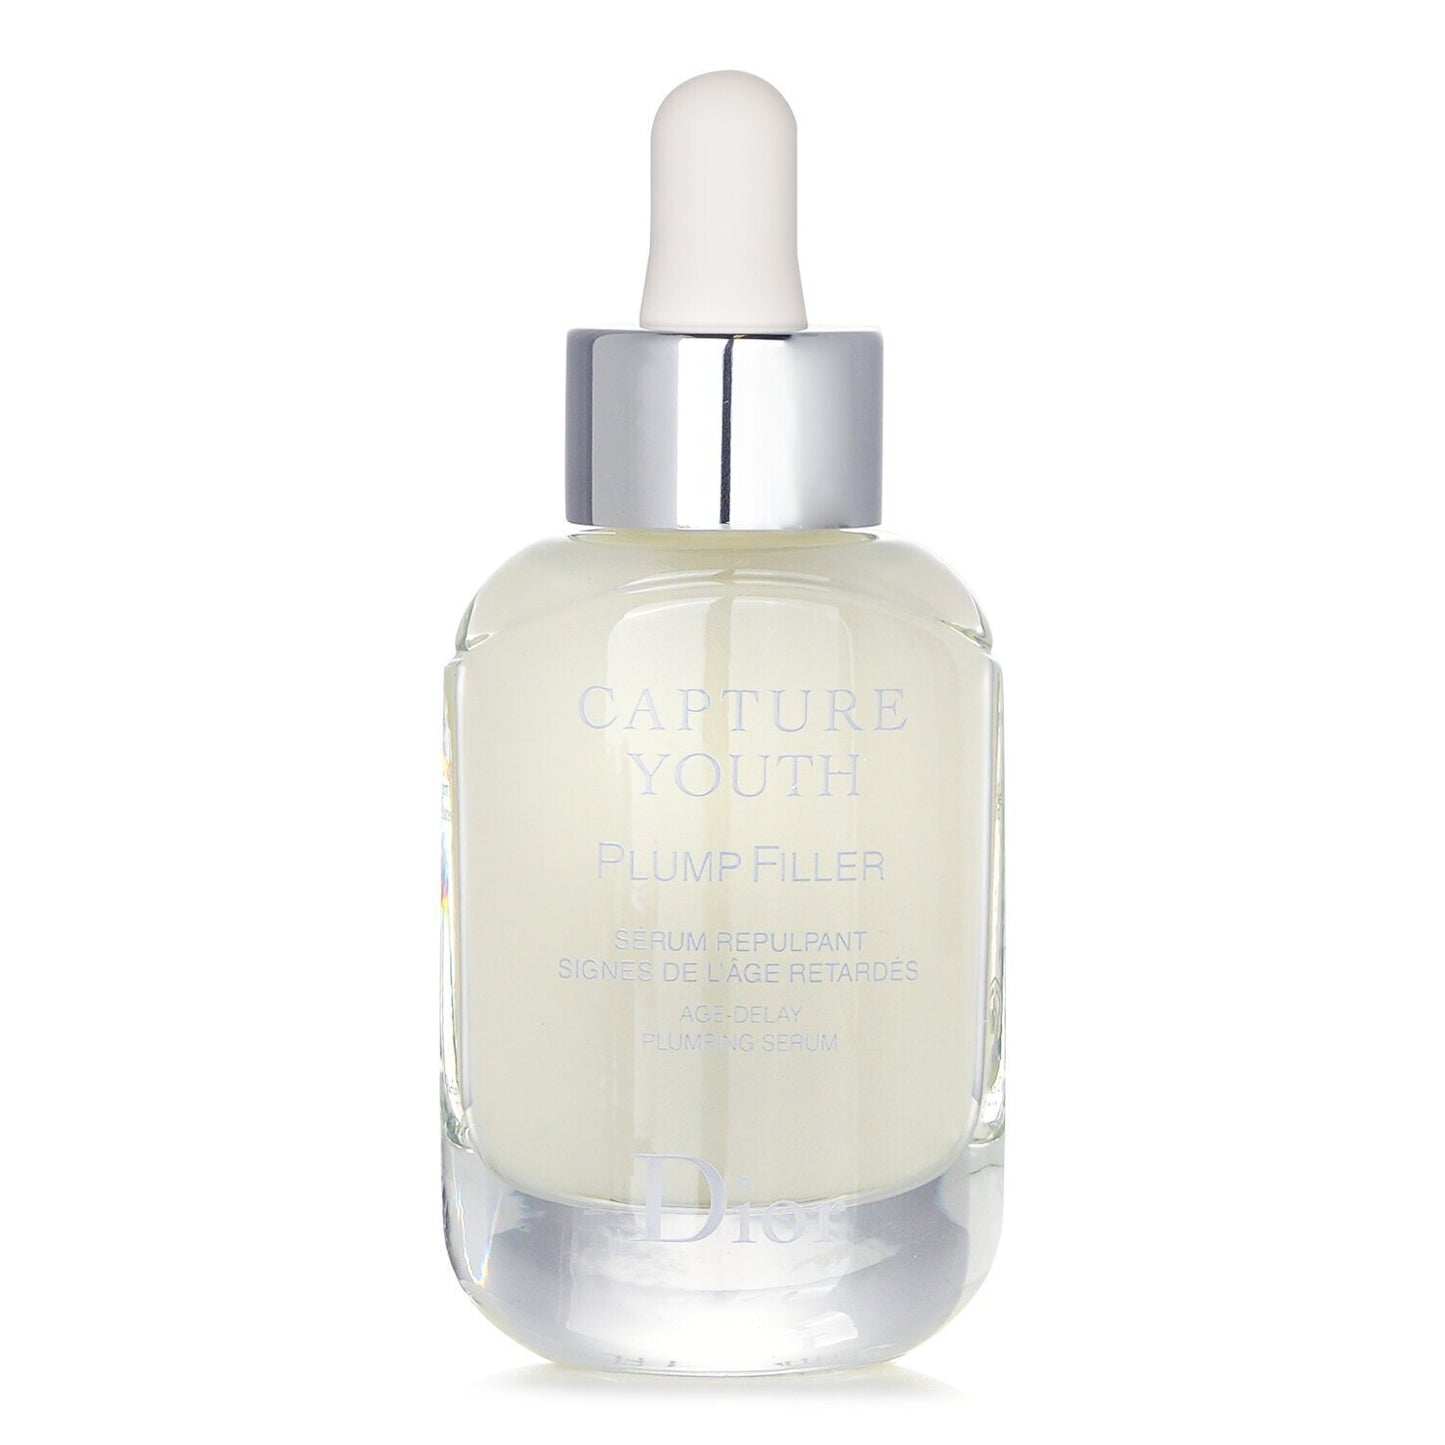 CHRISTIAN DIOR - Capture Youth Plump Filler Age-Delay Plumping Serum 37785/C099600005 30ml/1oz